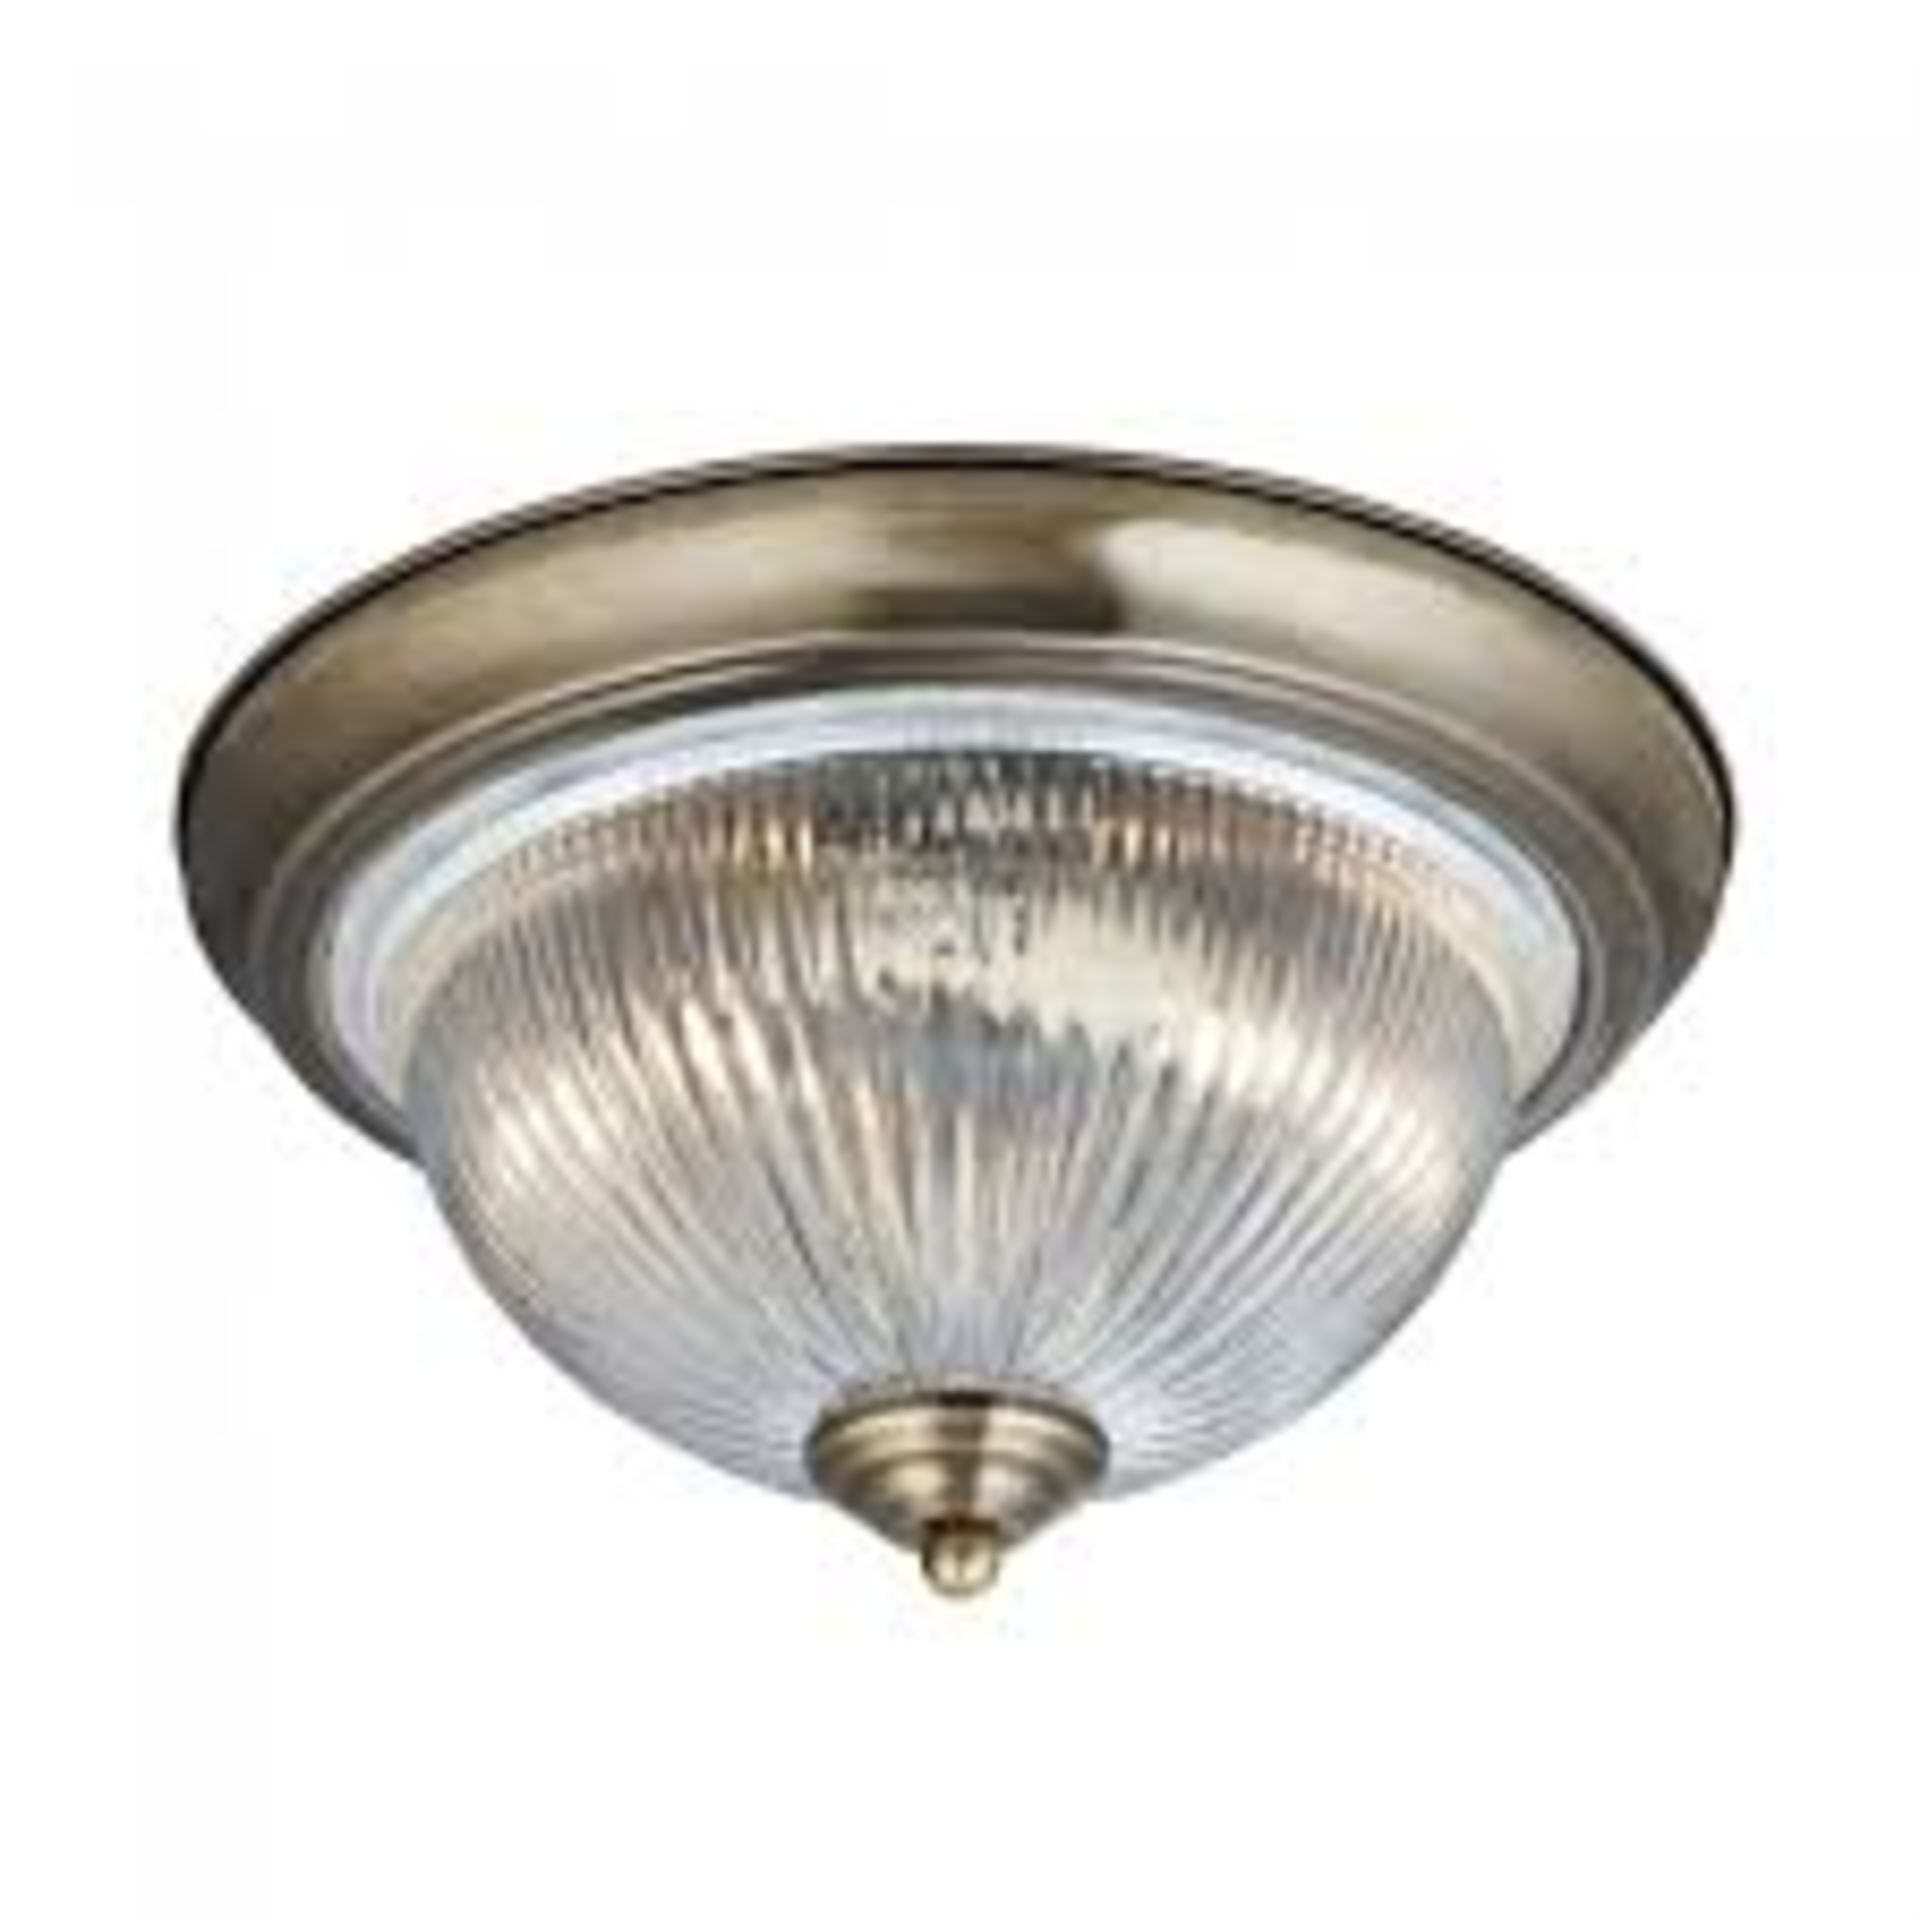 1 x Searchlight Bathroom Flush in Antique Brass - Ref: 4370 - New and Boxed stock - RR: £50 - Image 4 of 4